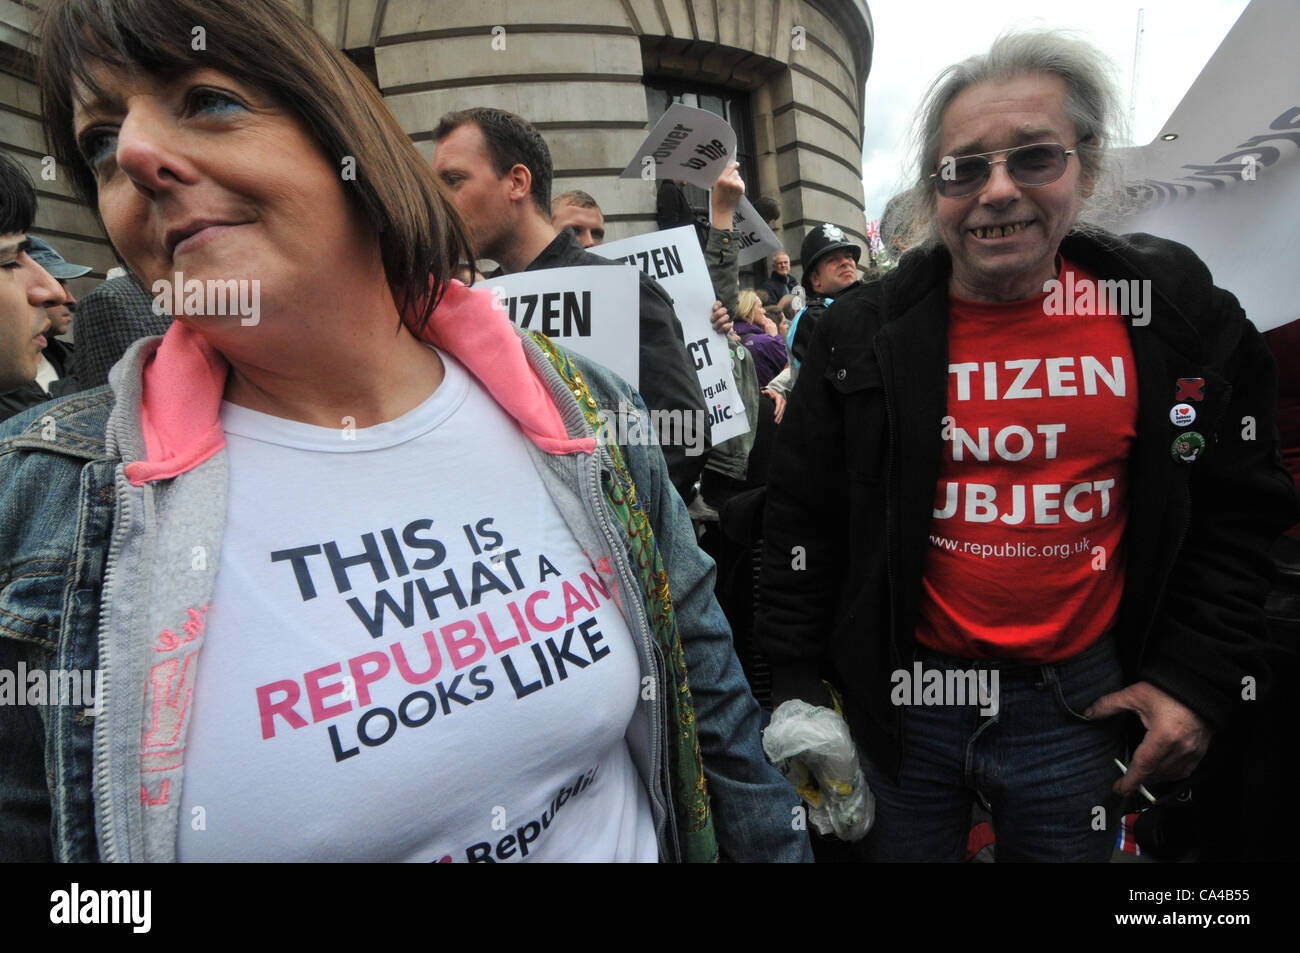 Whitehall, London, UK. 5th June 2012. Republic protesters wearing T shirts amongst the dense crowds of people waiting to catch a glimpse of the Queen. Stock Photo